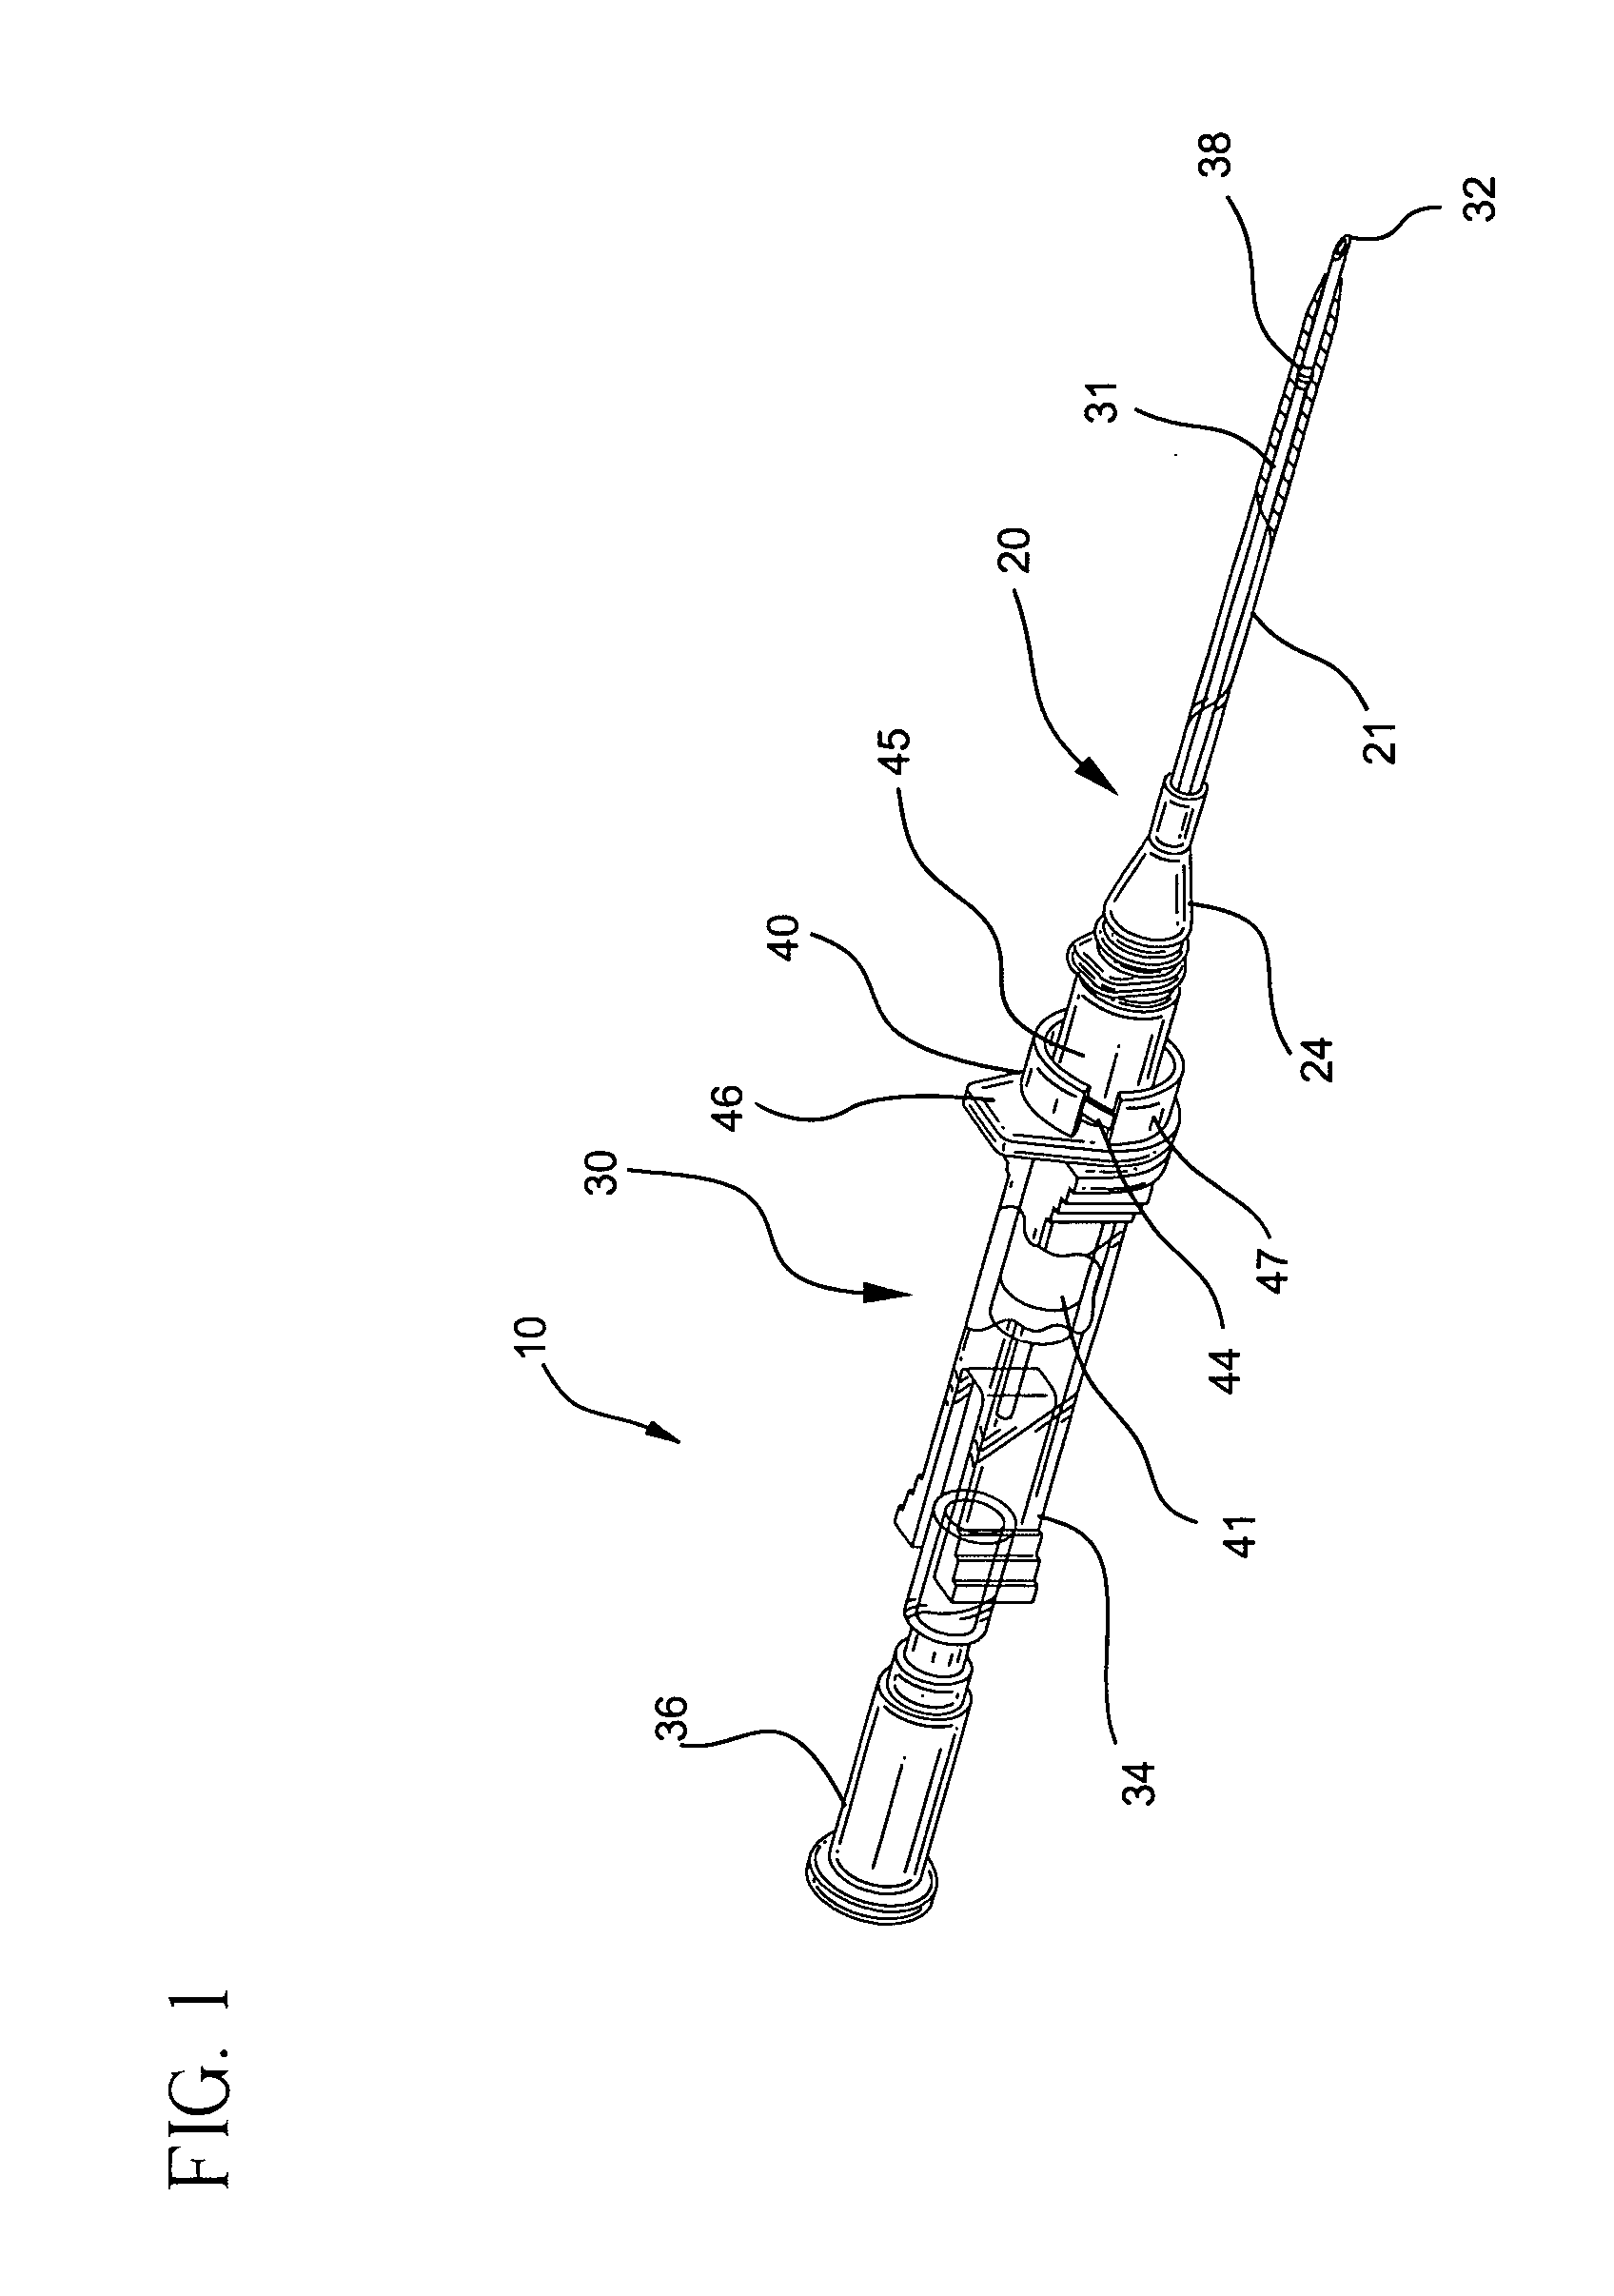 Catheter and introducer needle assembly with needle shield